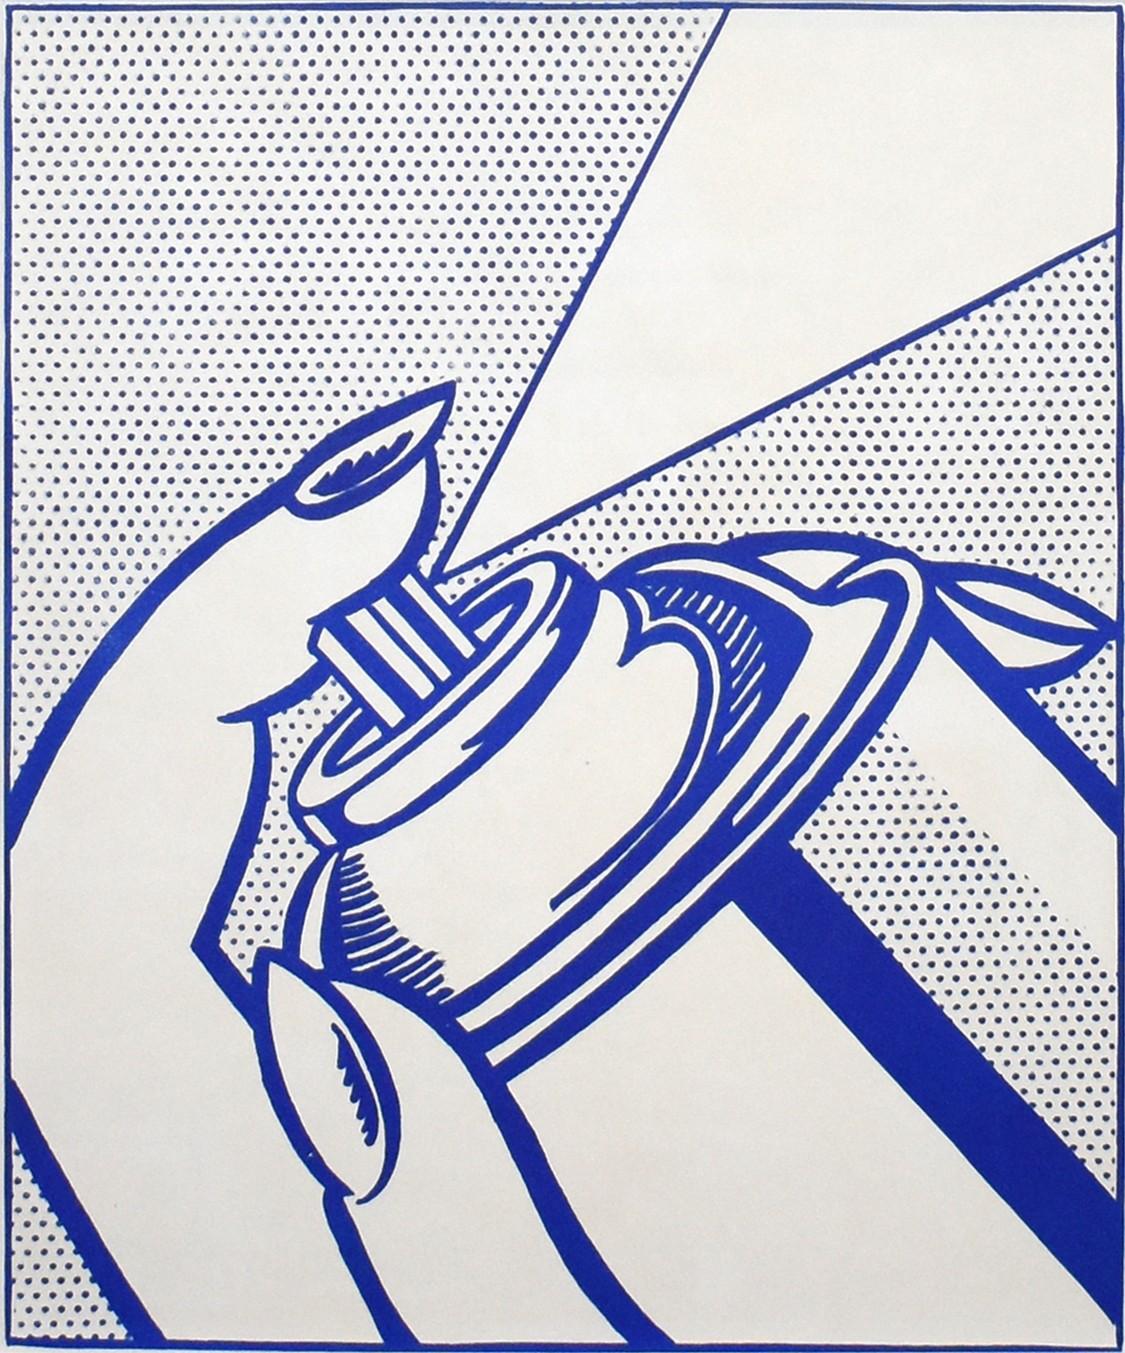 Artist: Roy Lichtenstein
Title: Spray Can
Portfolio: 1¢ Life
Medium: Lithograph on white wove paper
Year: 1963
Edition: 2000
Frame Size: 21 1/4" x 19 1/4"
Sheet Size: 16" x 11 1/2"
Image Size: 12 1/2" x 10 1/2"
Signature: Unsigned
Reference: Corlett